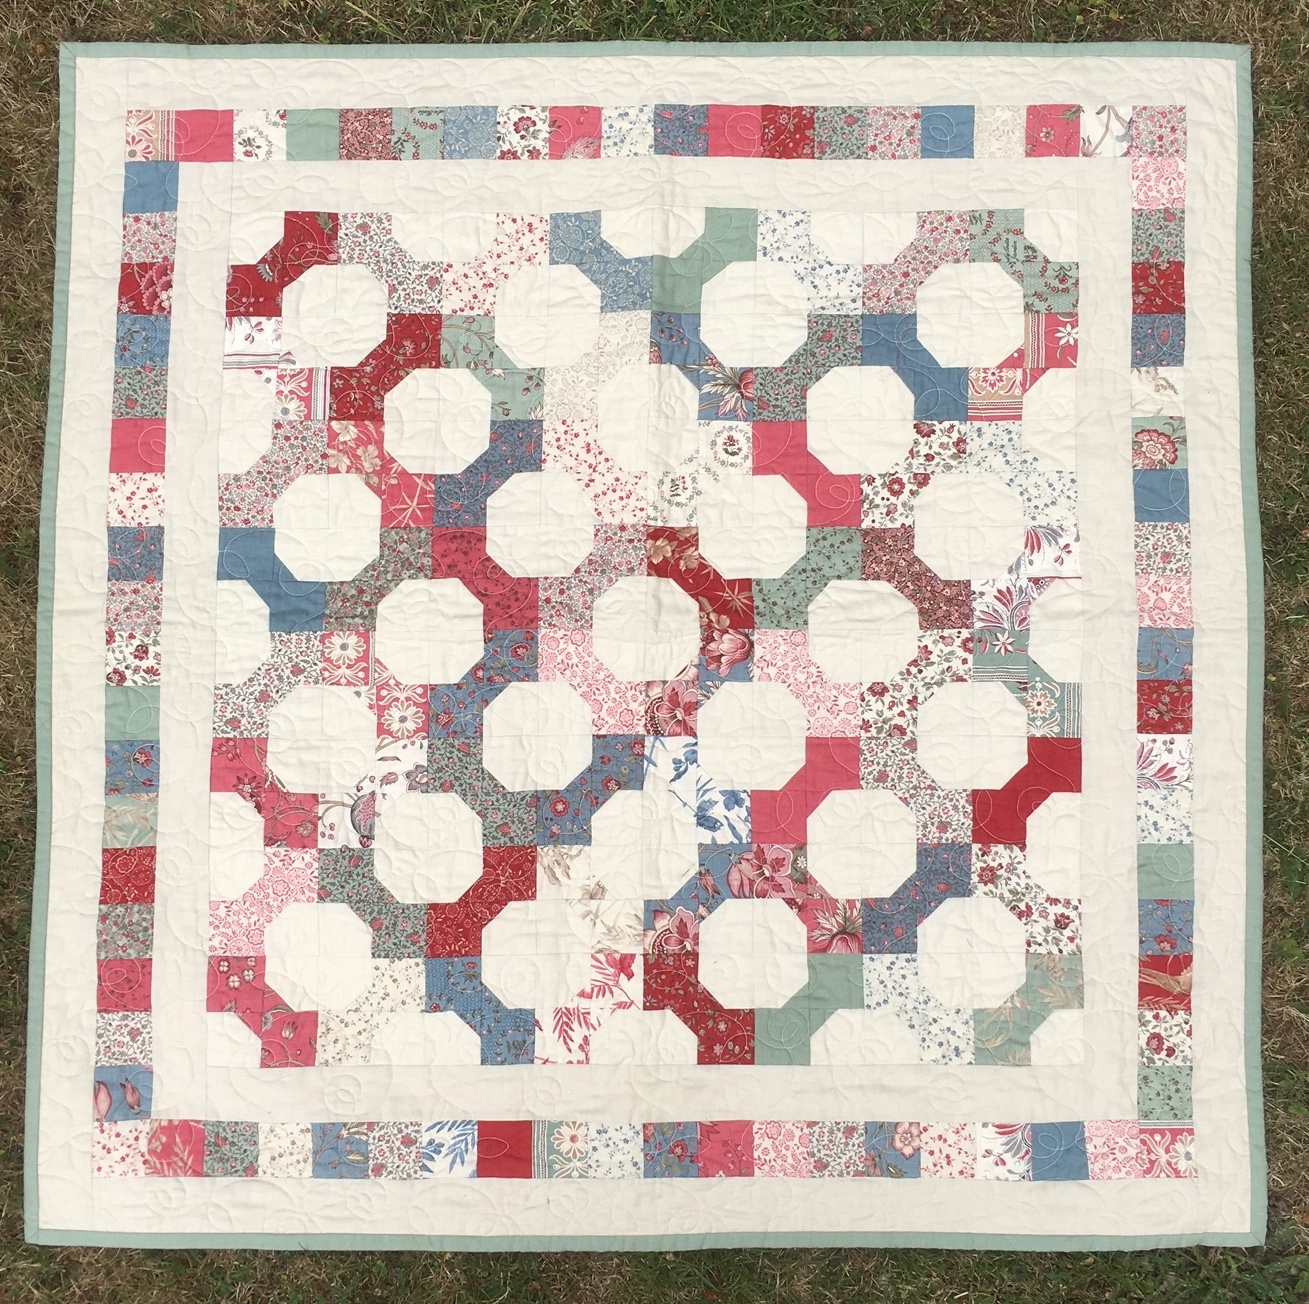 Janet quilt 3 cropped.jpg